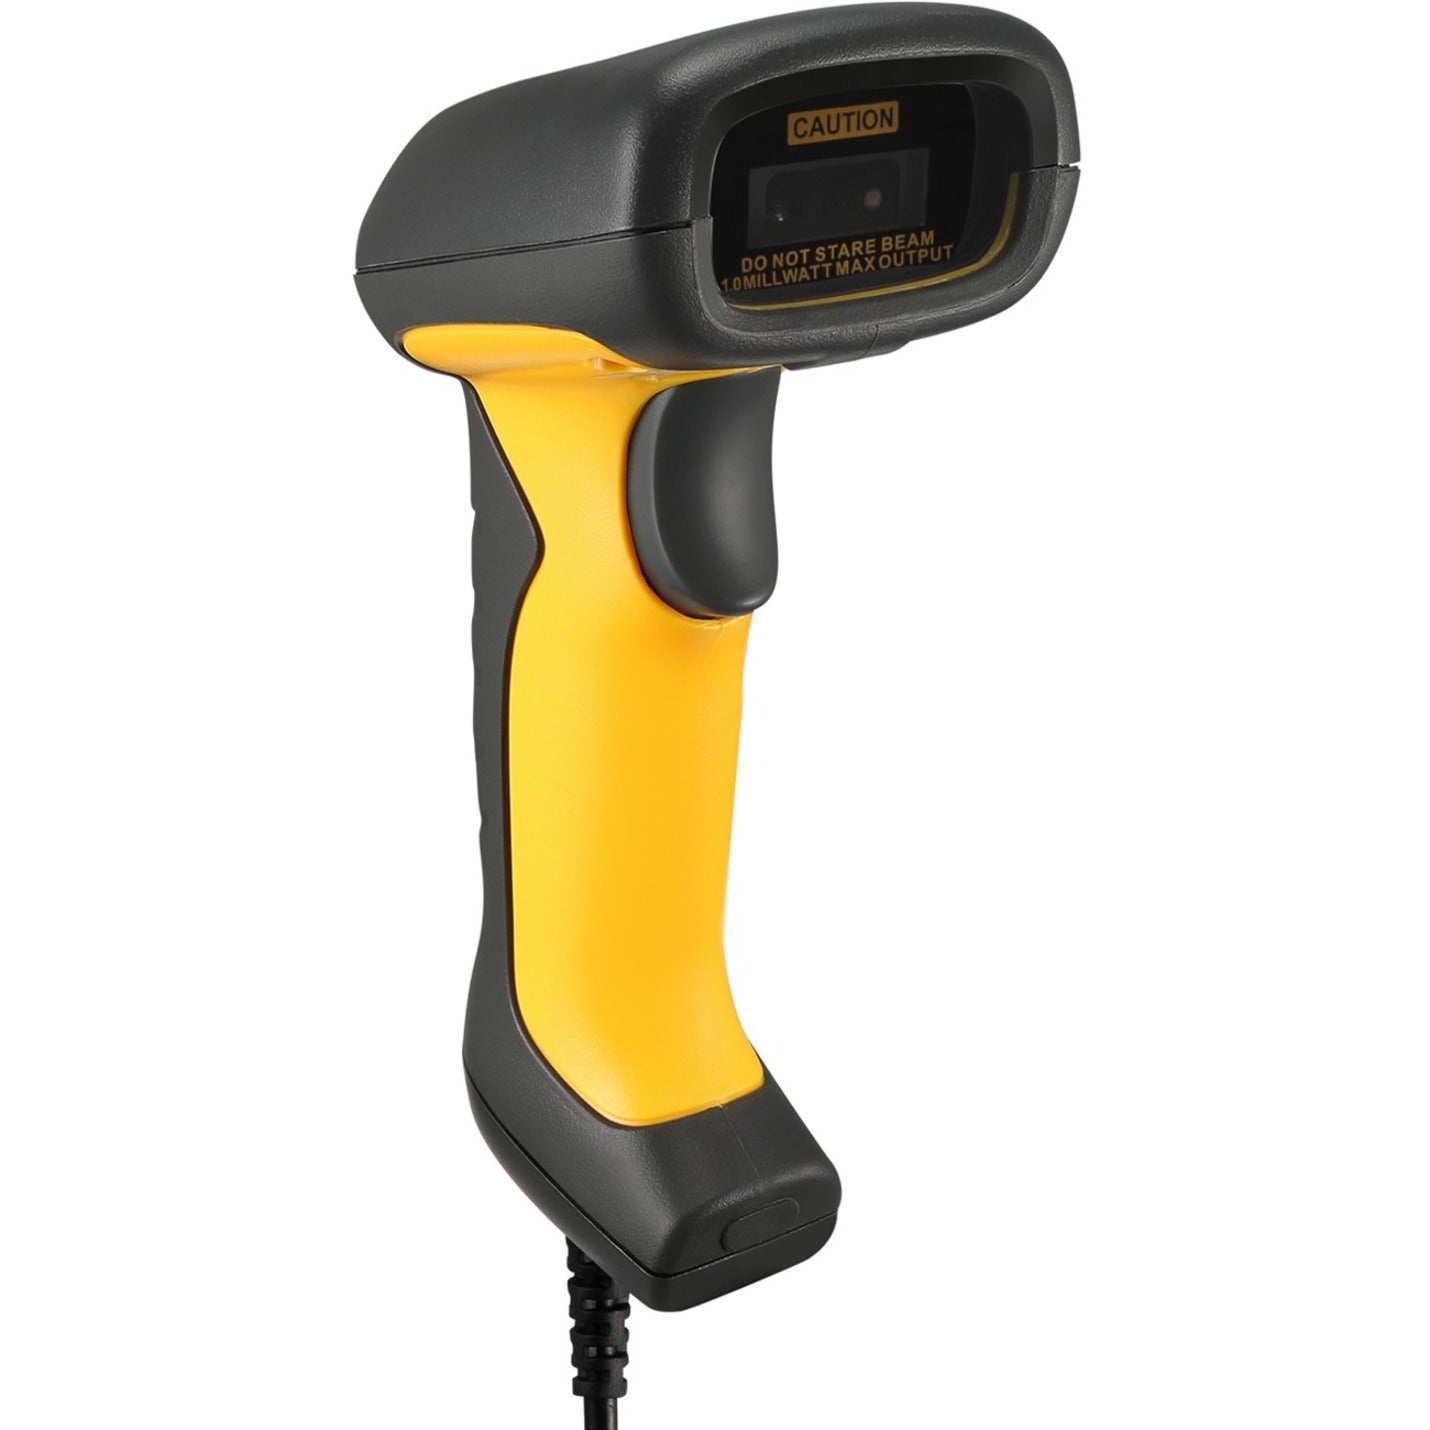 Adesso NUSCAN 5200TU Antimicrobial & Waterproof 2D Barcode Scanner, Long Range, USB, Industrial, Logistics, Healthcare, Retail, Library